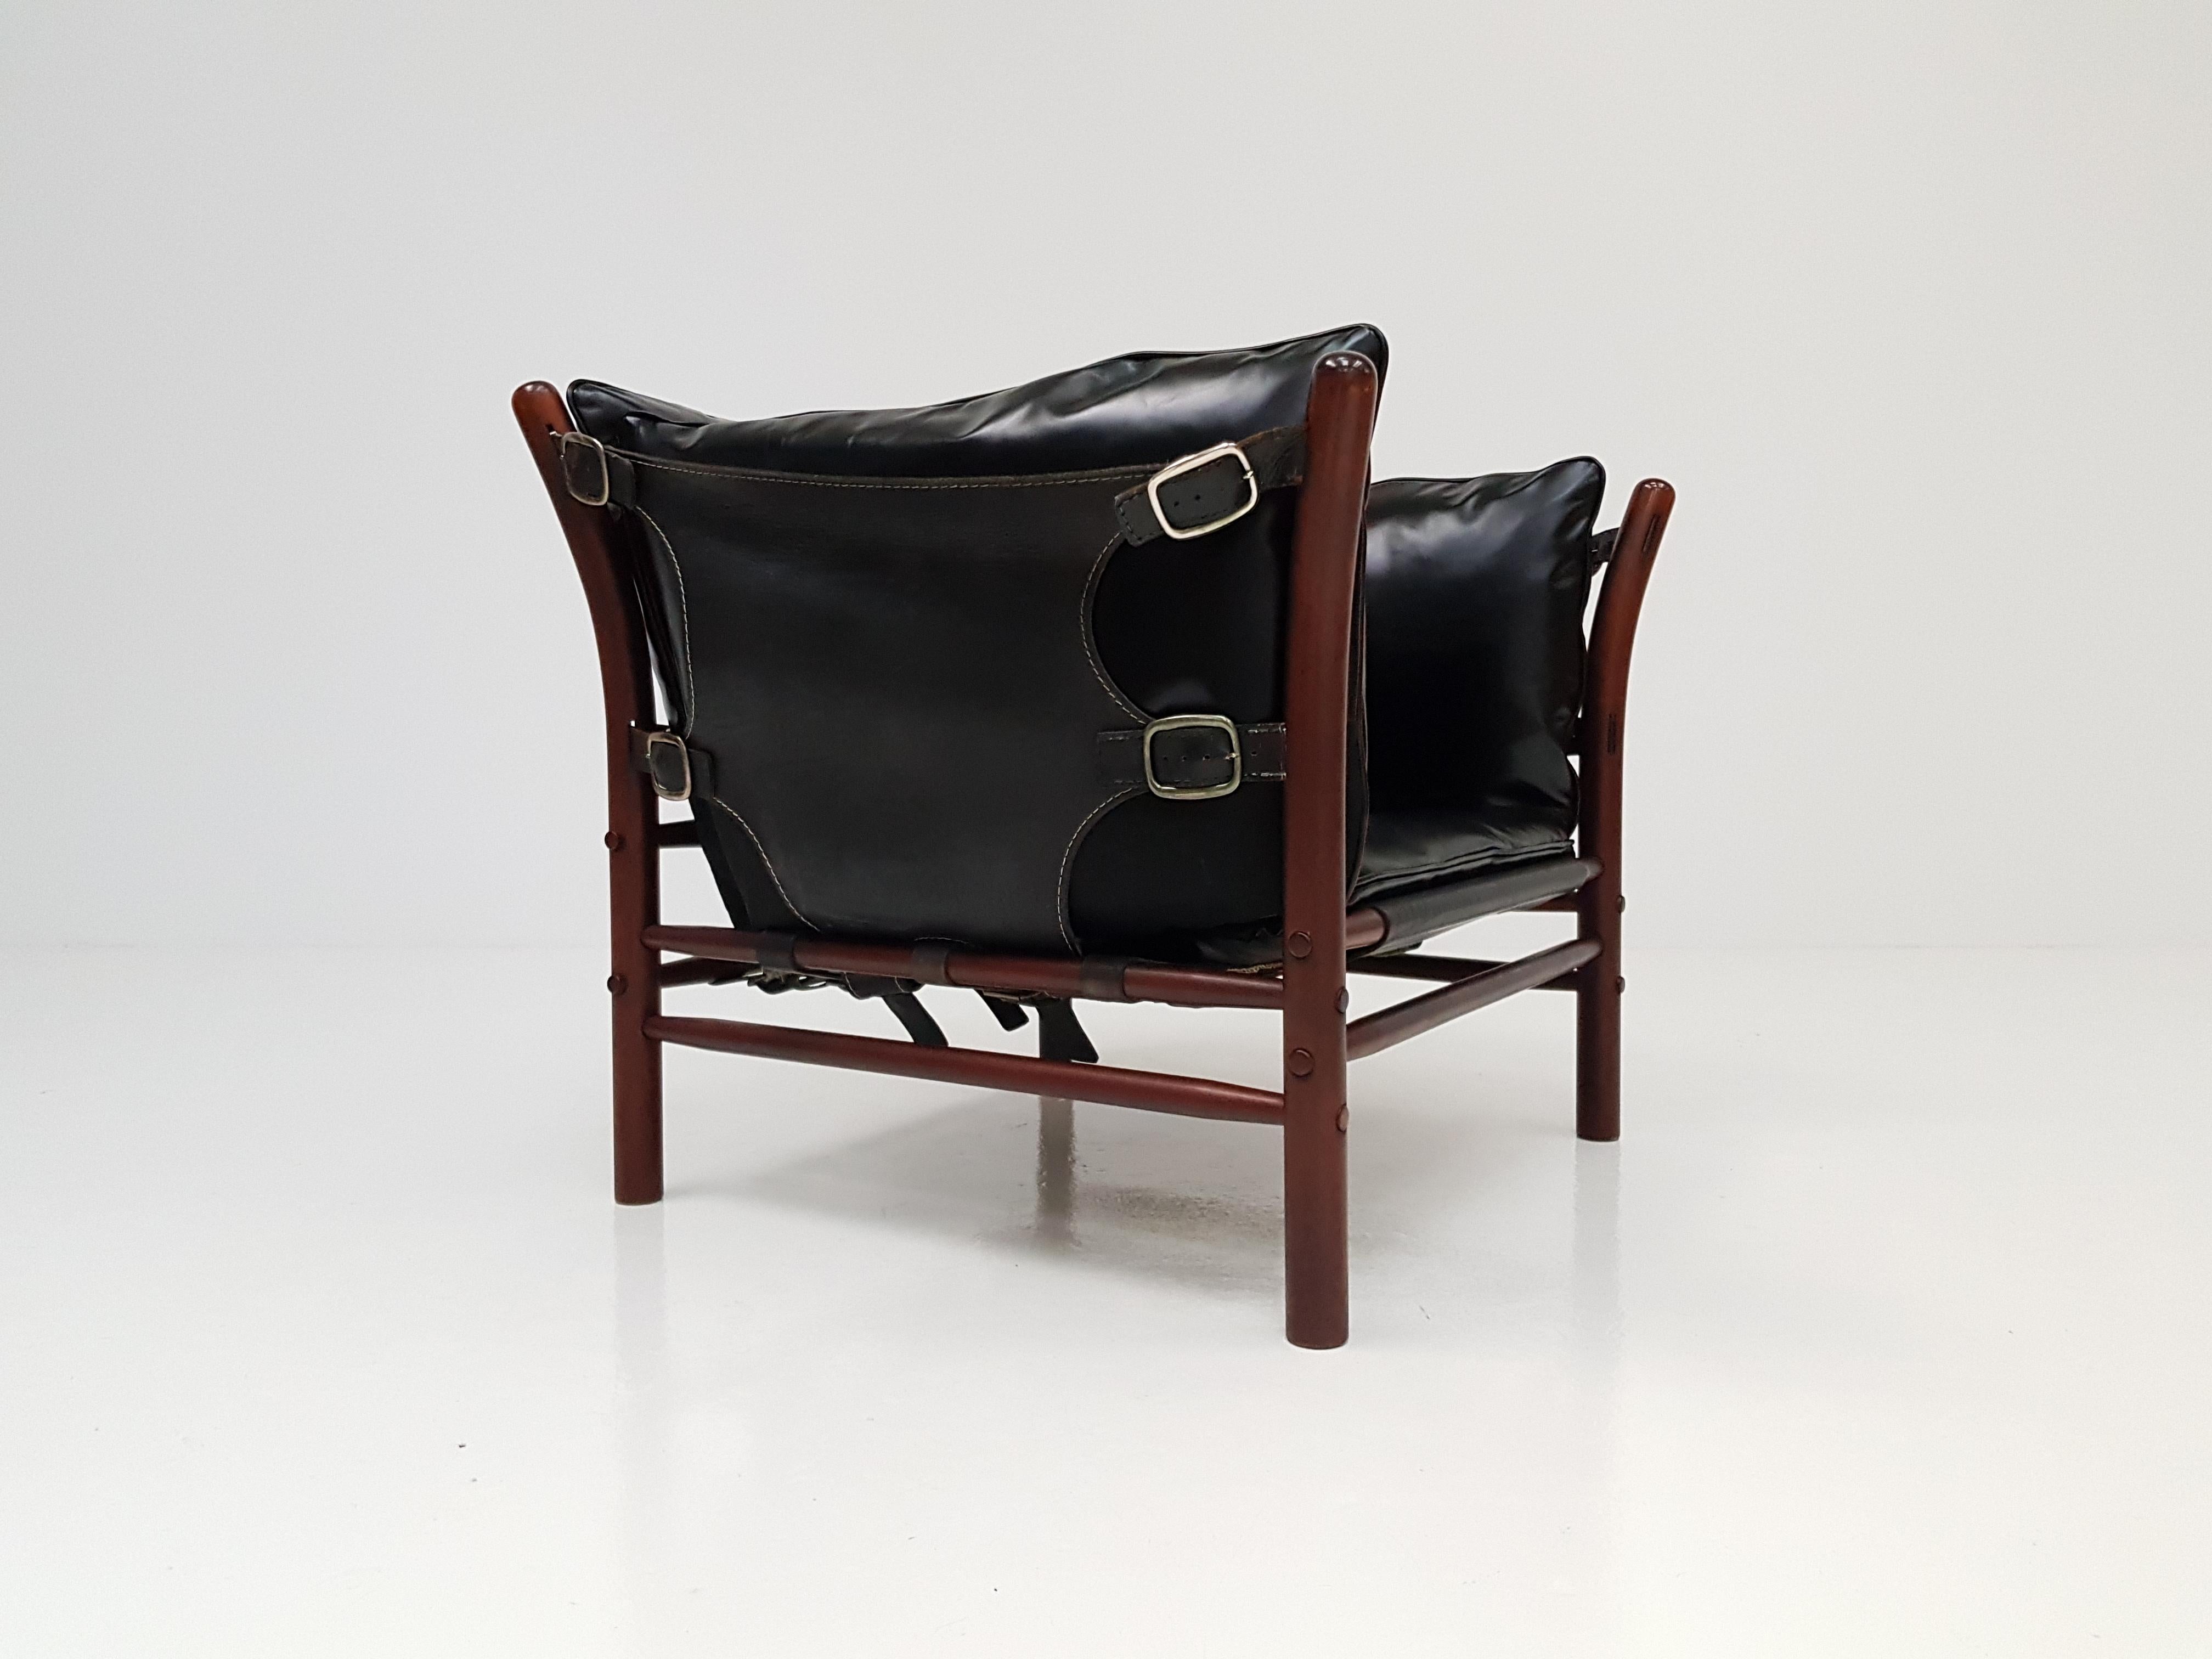 A 1960s 'Ilona' chair by Swedish Designer Arne Norell.

Featuring stained beech, brass buckles and saddle leather with 4 loose cushions. This is a rarer variant of the Ilona design which has a very current and en-trend look.

We can offer very